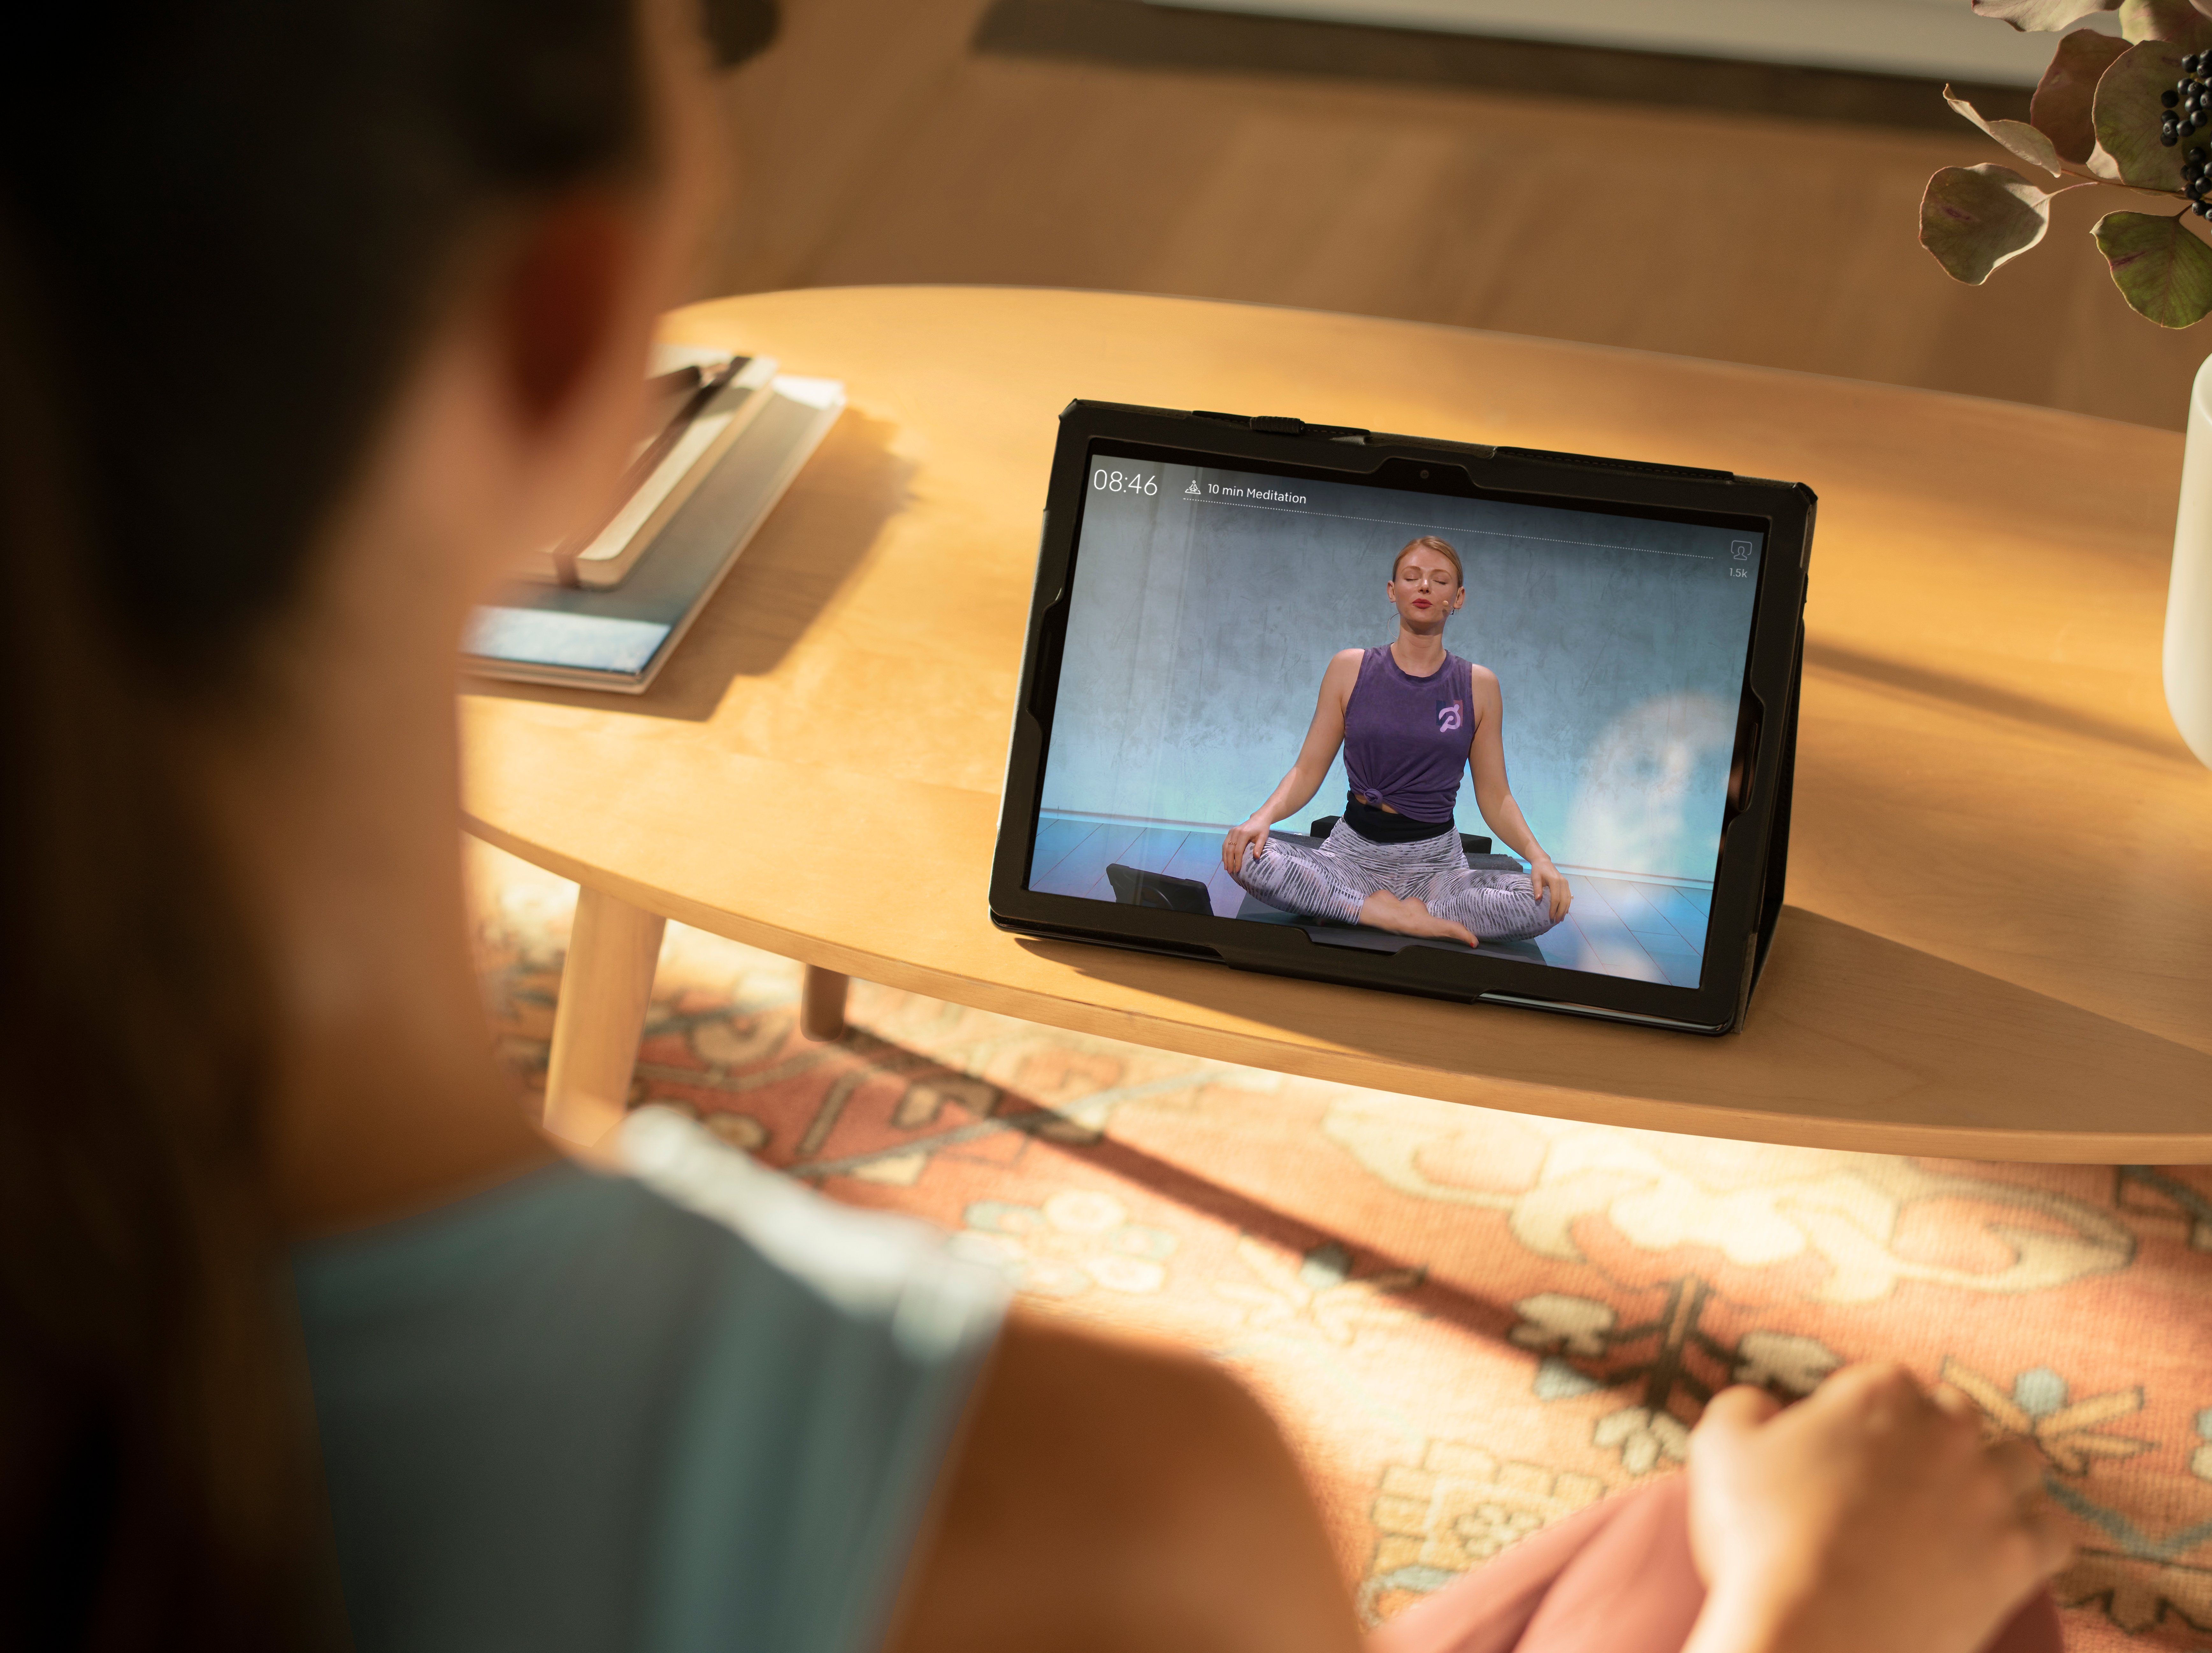 woman doing meditation exercises with laptop screen showing Peloton app